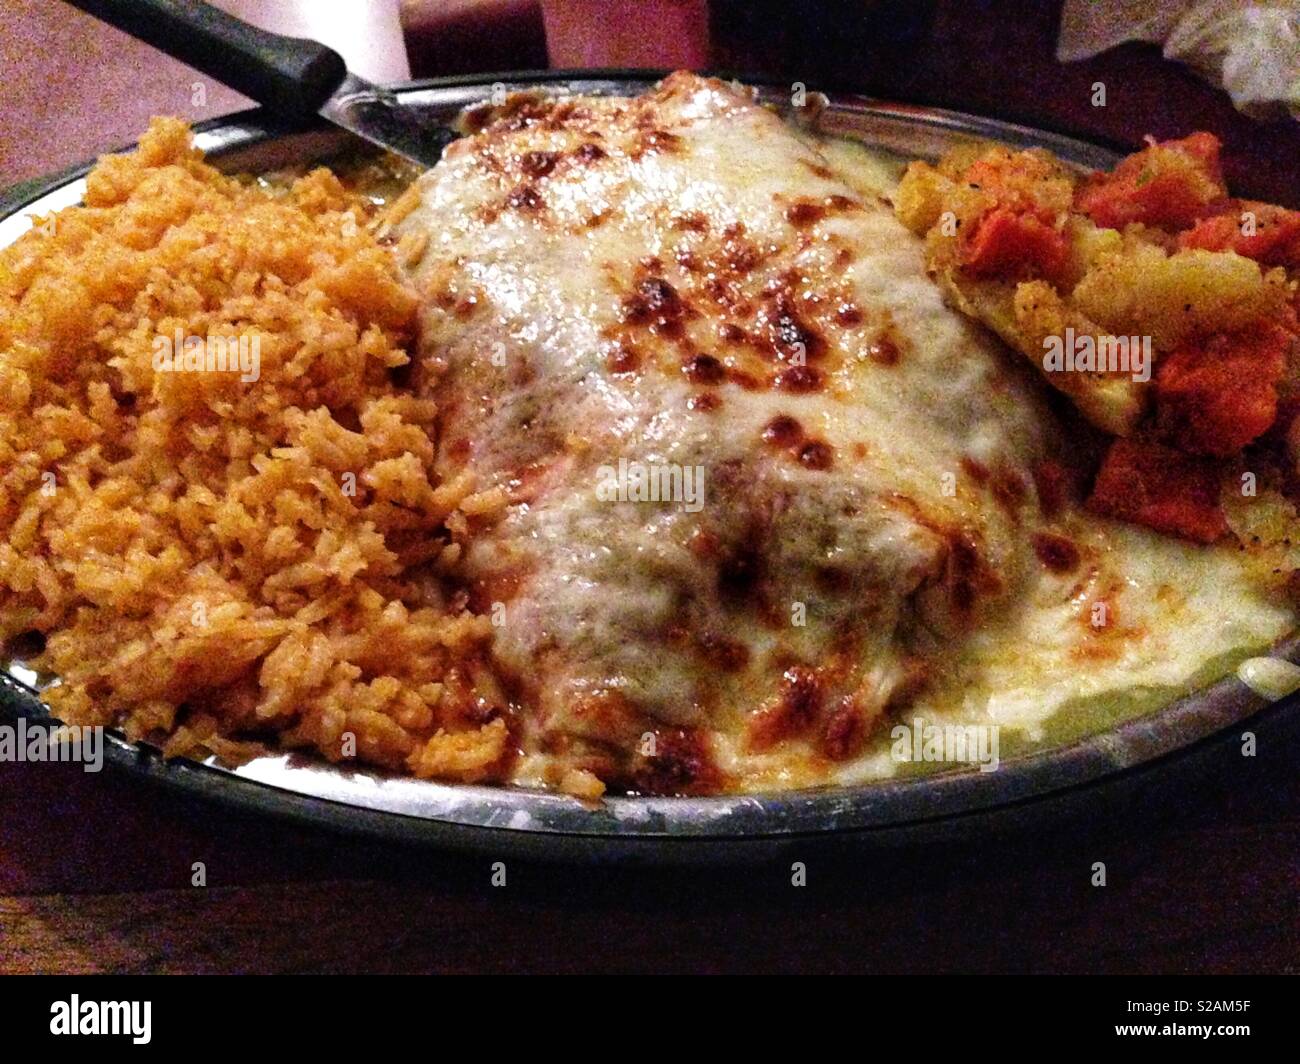 Mexican Food Stock Photo